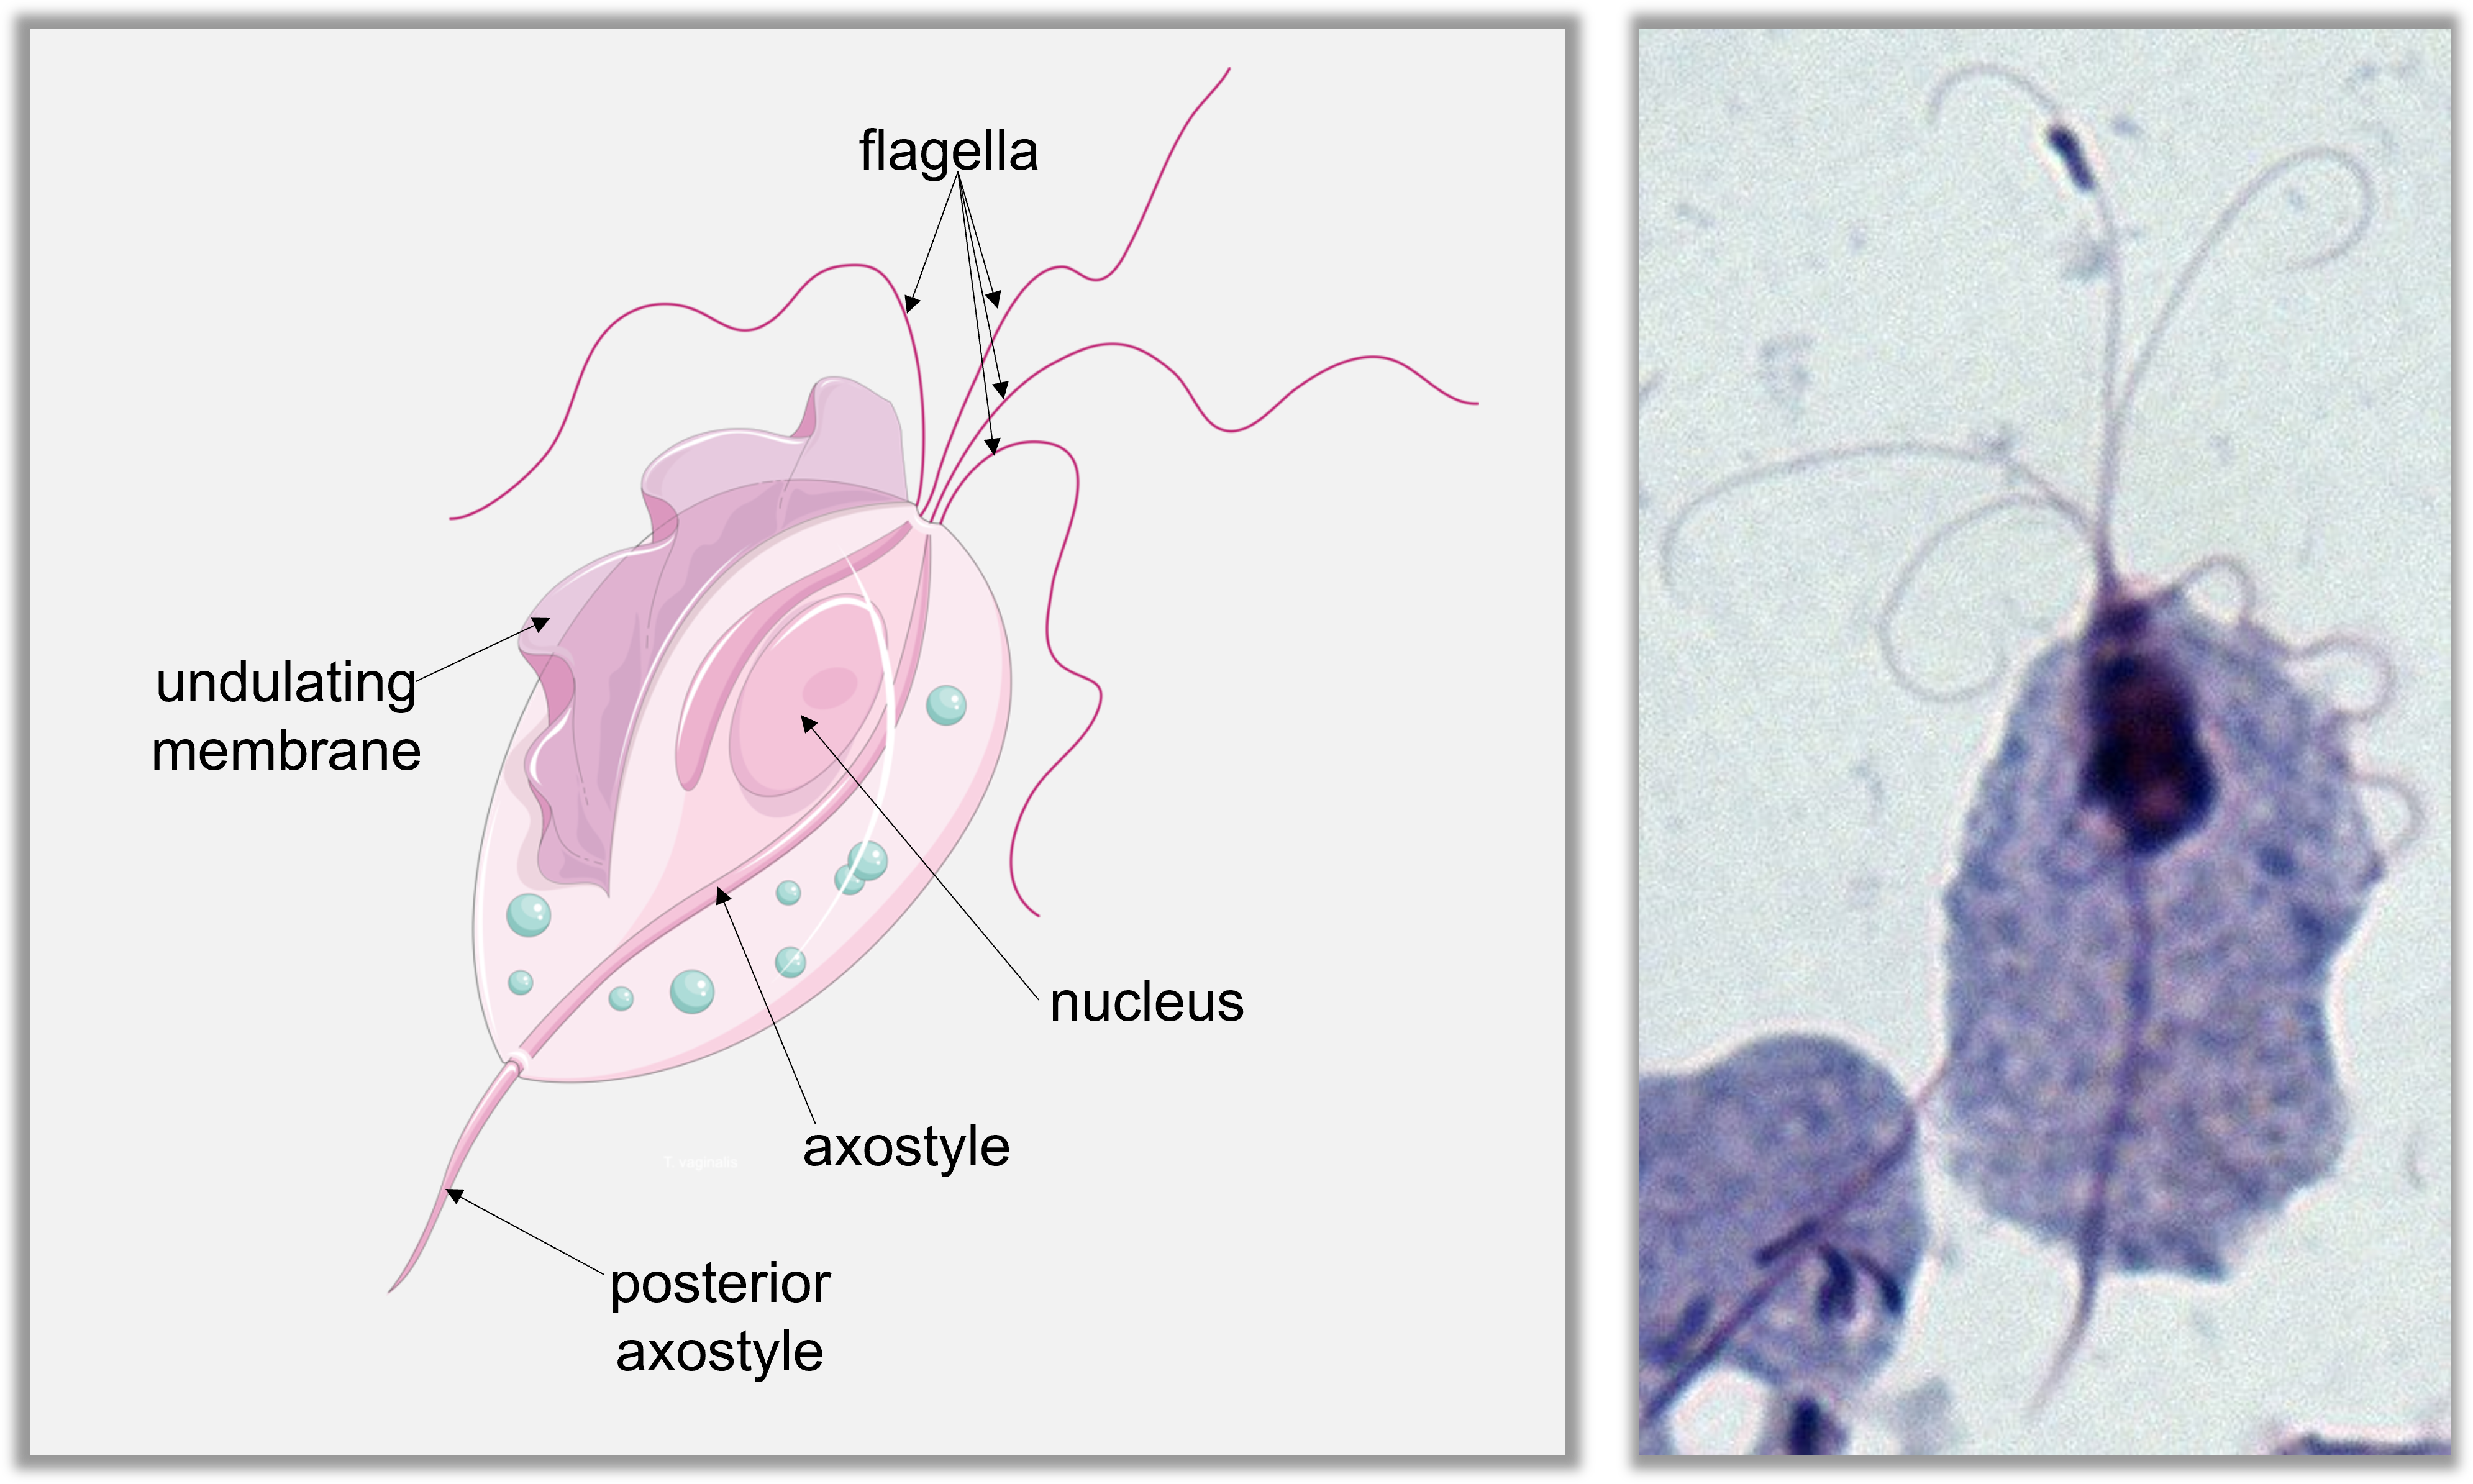 Trichomonas vaginalis cell structure shown along side a microscopic image of T. vaginalis